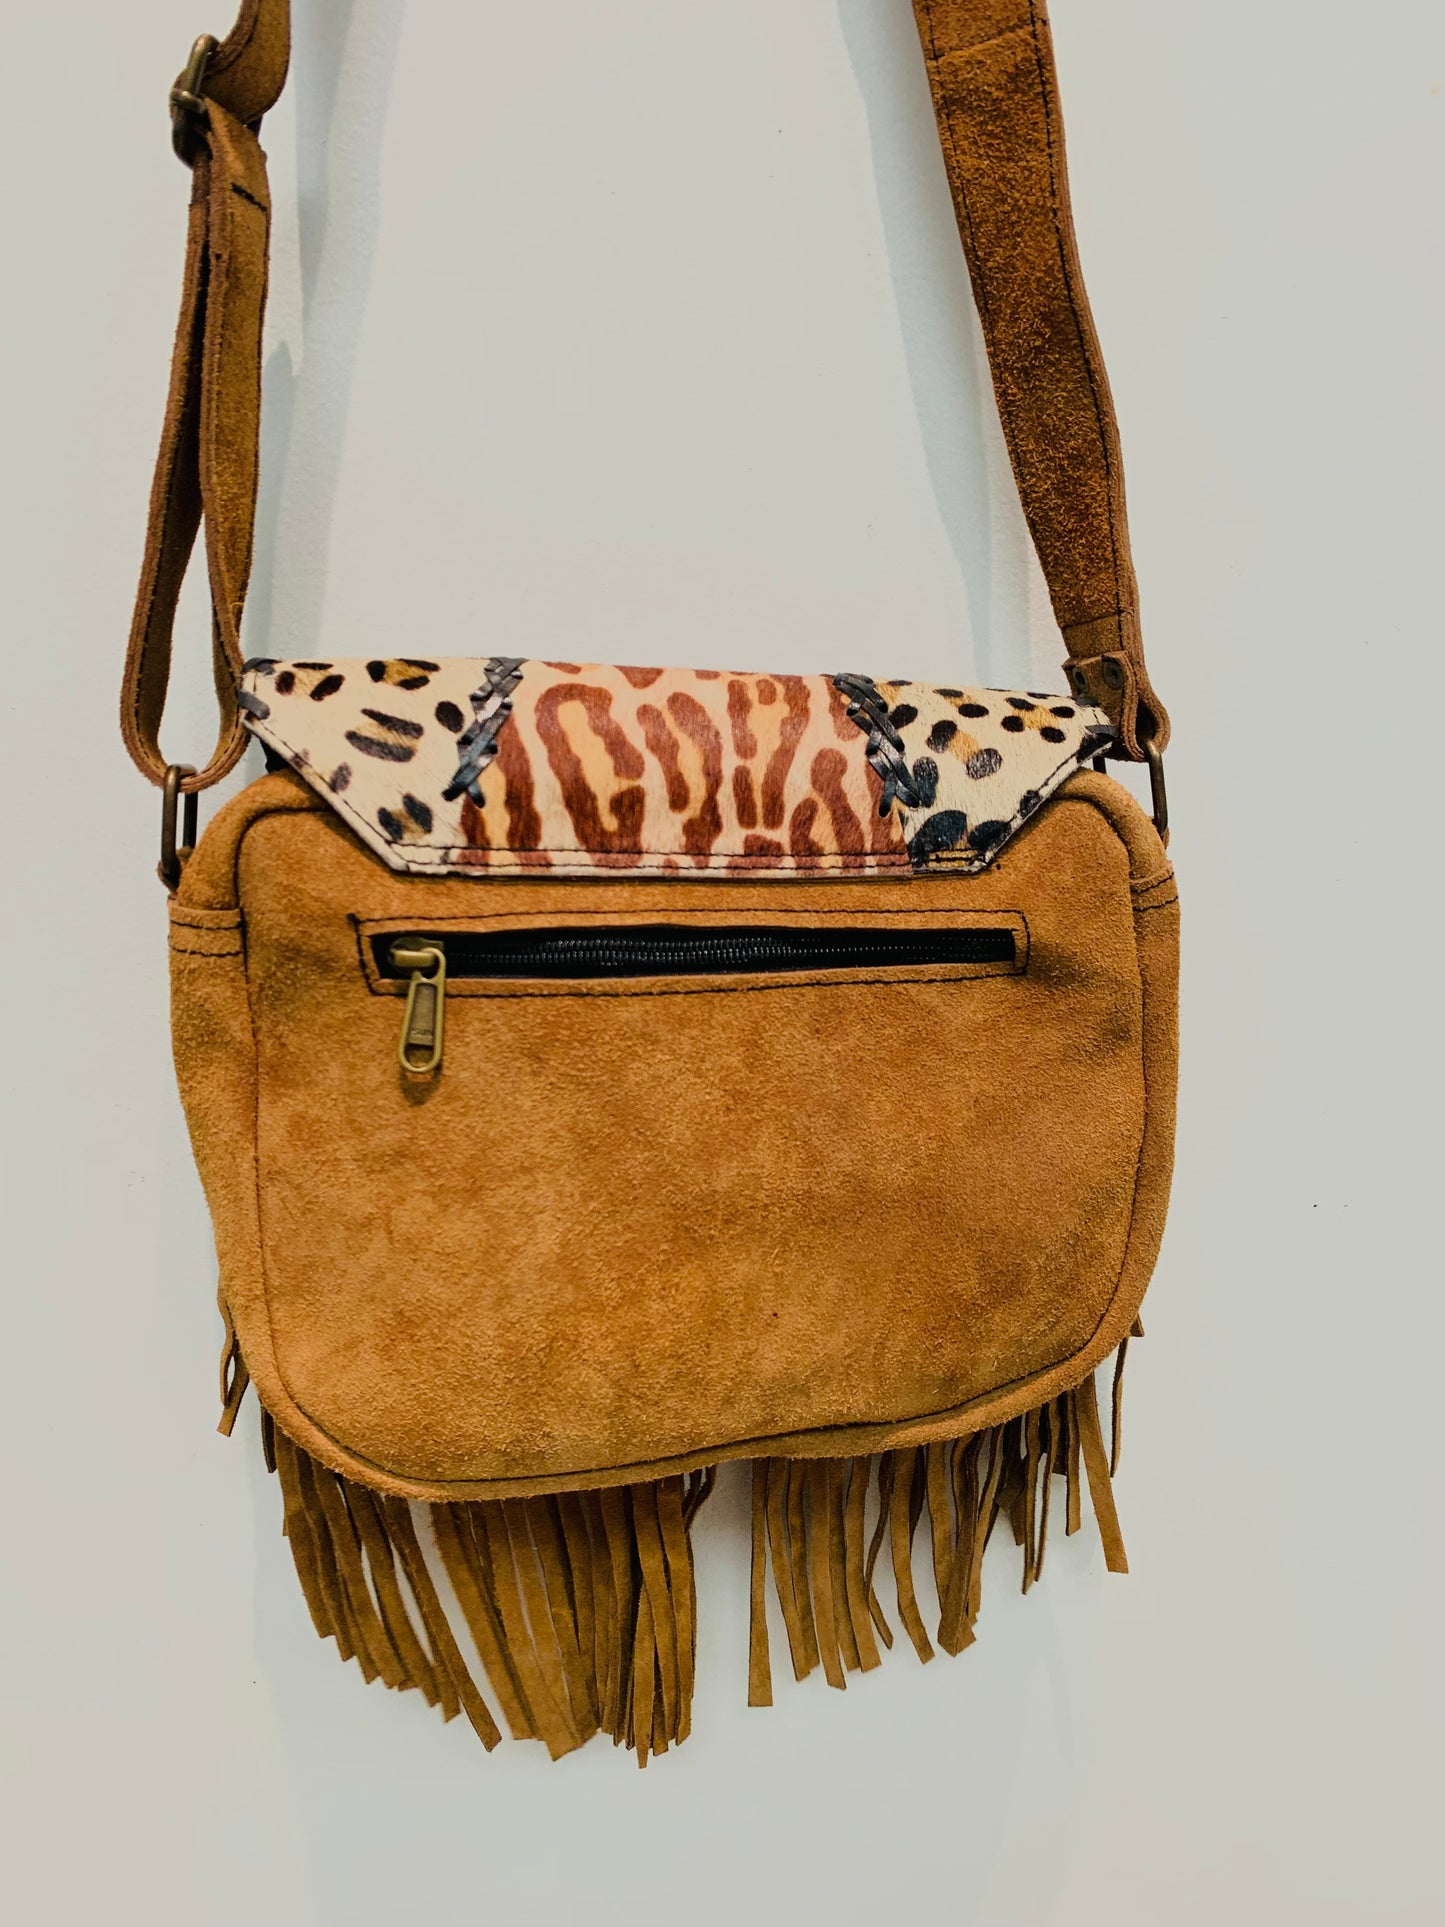 BOHEMIAN STATEMENT HANDCRAFTED GENUINE SUEDE LEATHER BAG #LEA1027